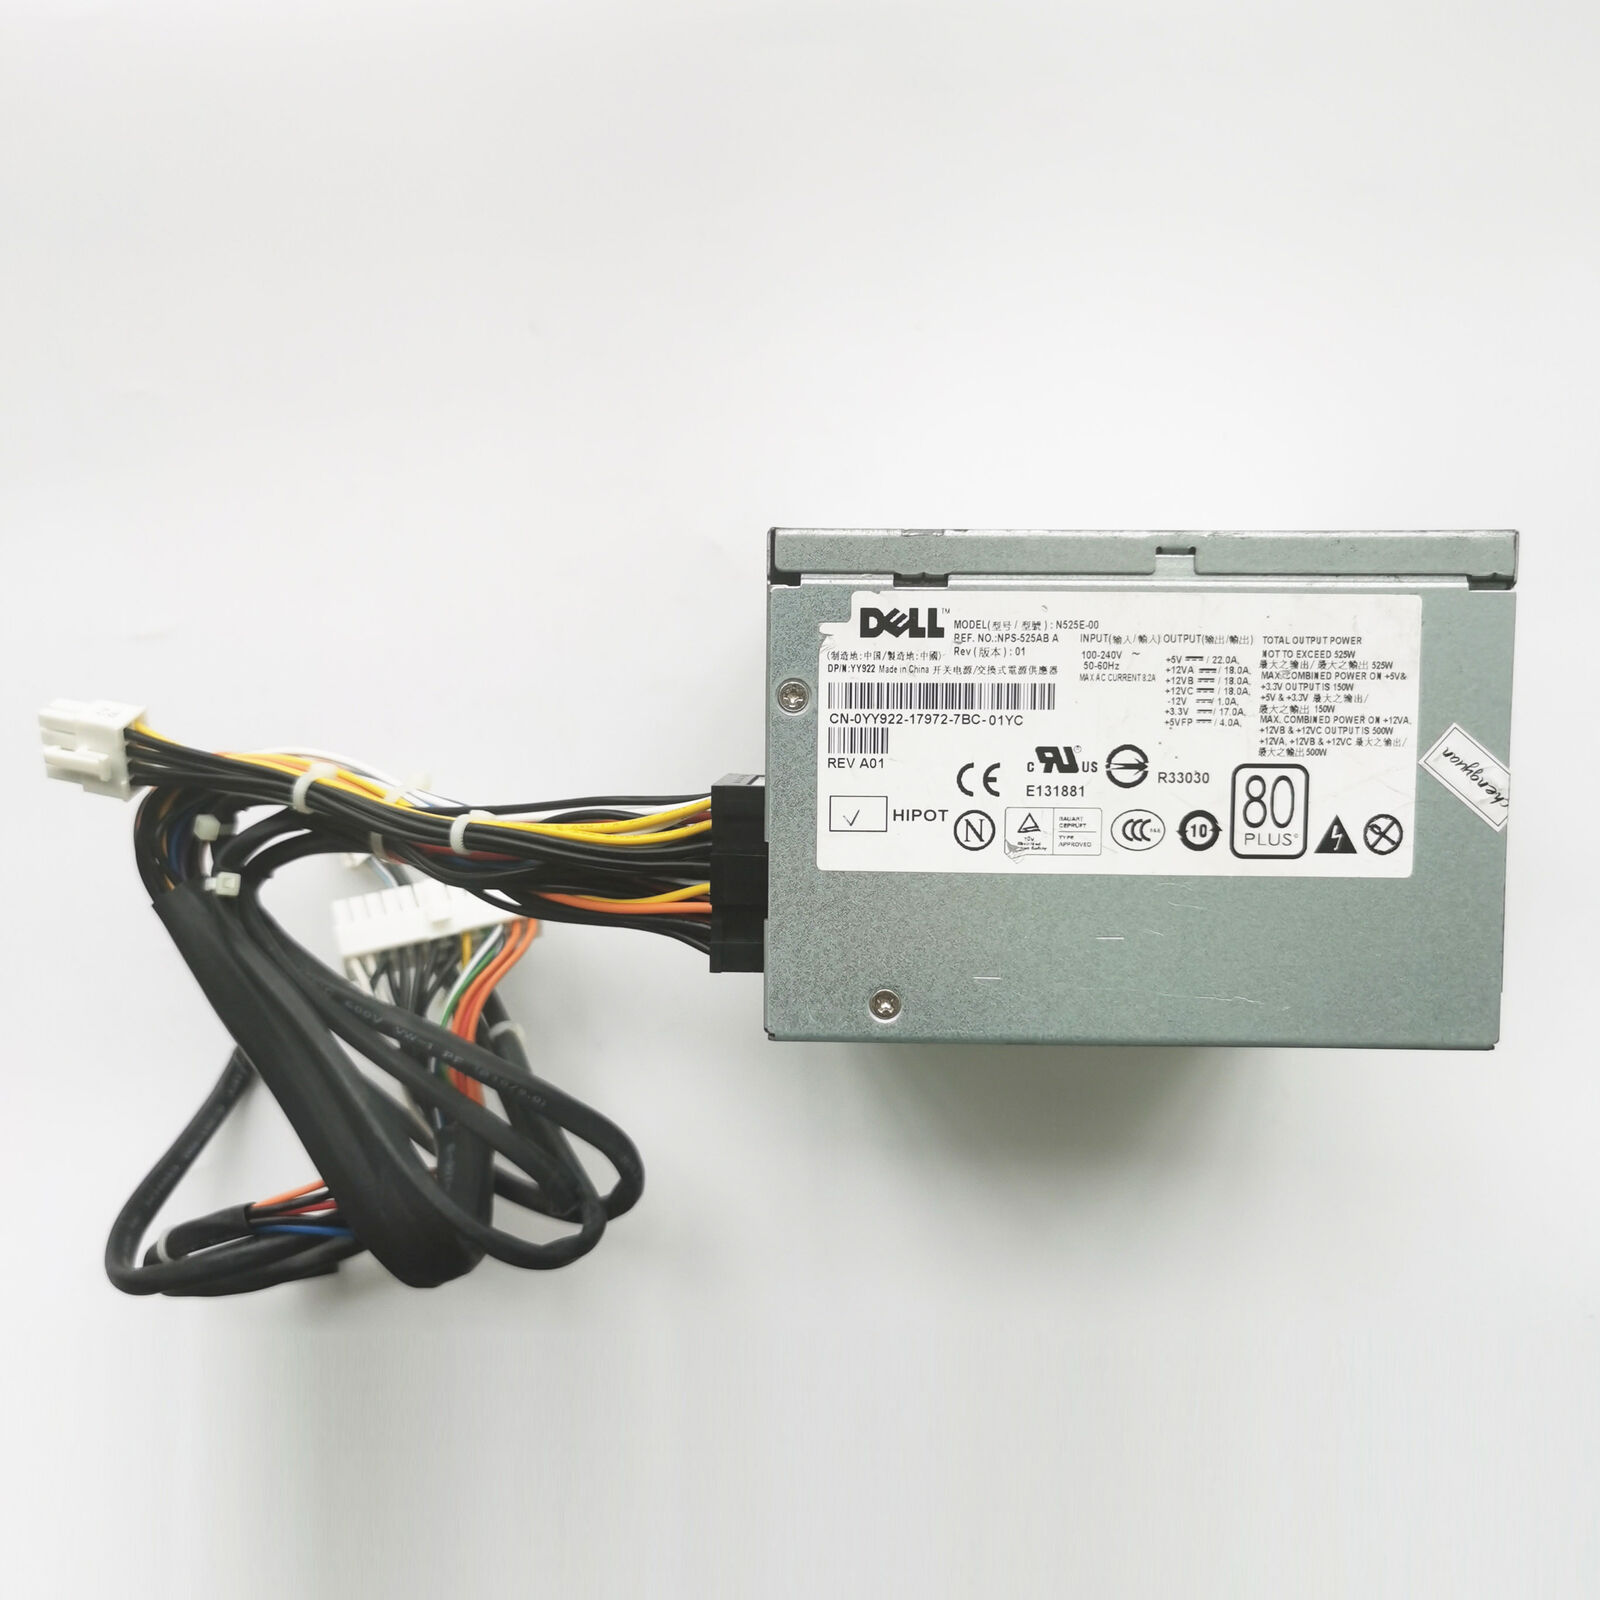 For Dell Power Supply 525W 380 390 T3400 T410 YY922 N52E-00 US